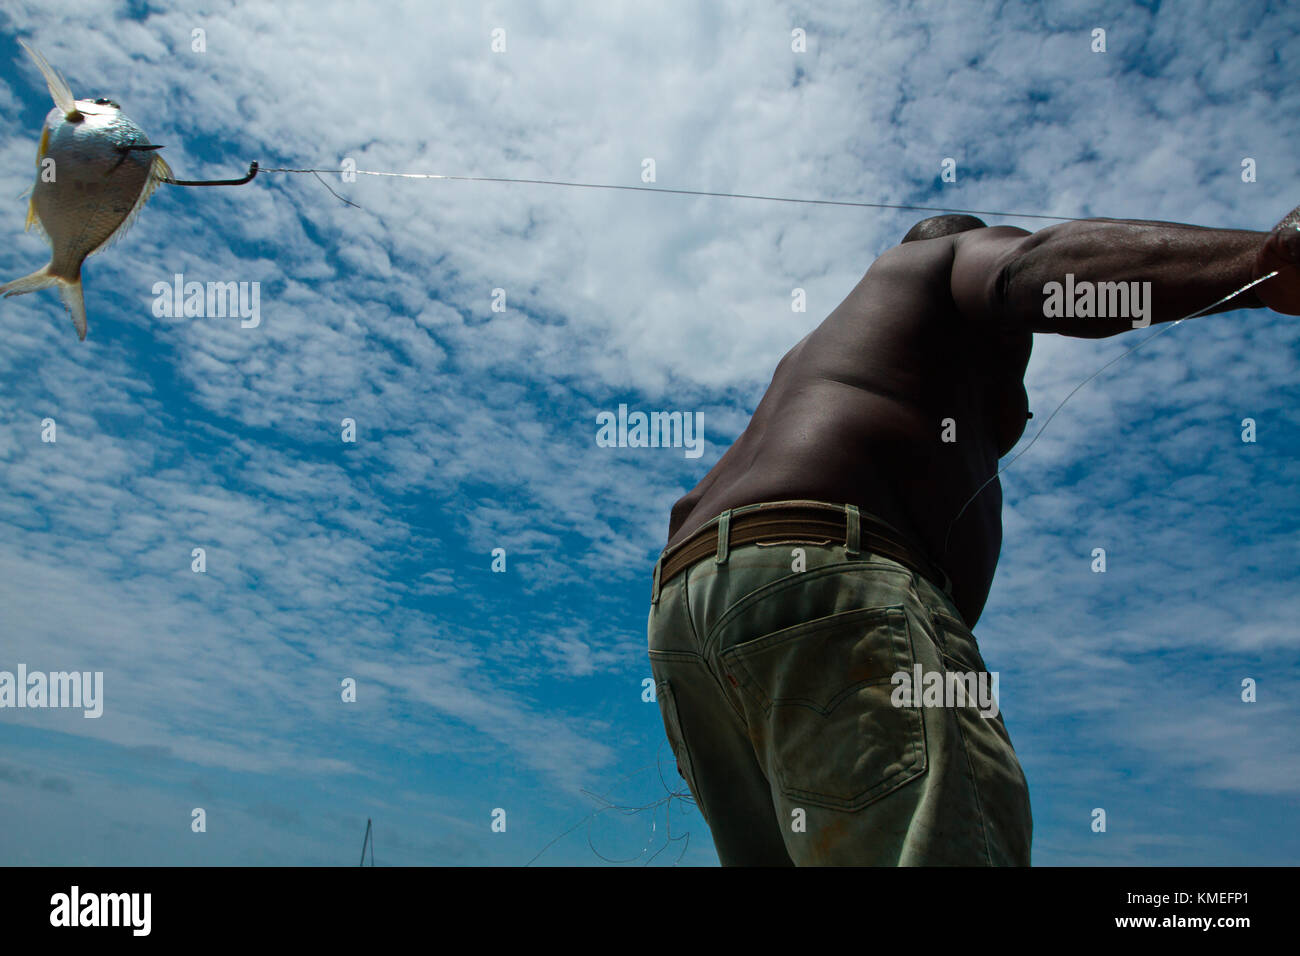 View from below of shirtless man casting fishing line with baitfish attached, Isla Marisol, Belize Stock Photo